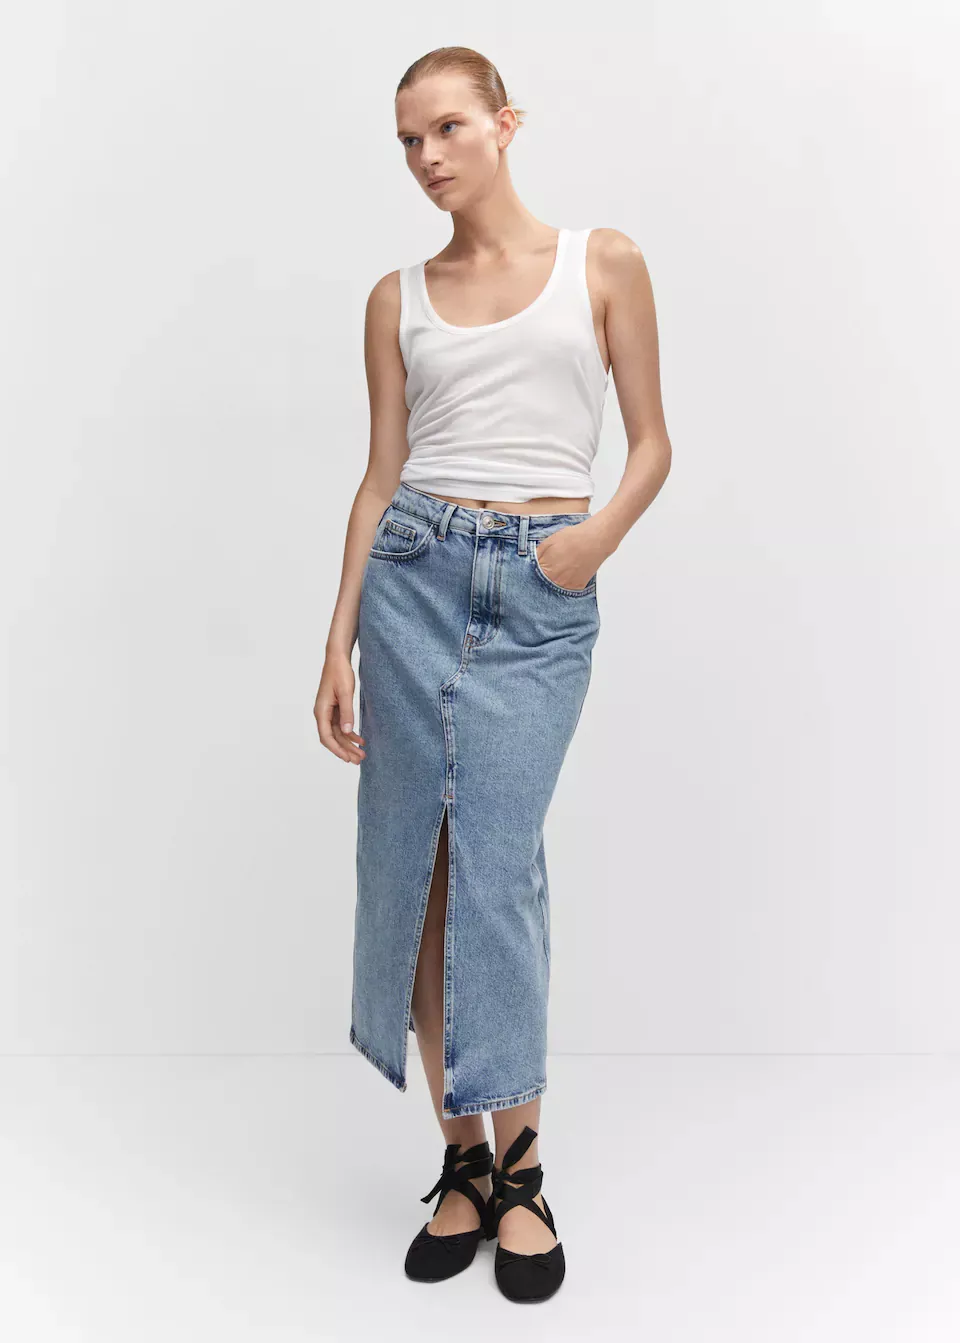 Zara TRF Mid-Rise Wide Leg Baggy Jeans 2023 Ss, Navy, EU 42 (No. 15) *Stock Confirmation Required